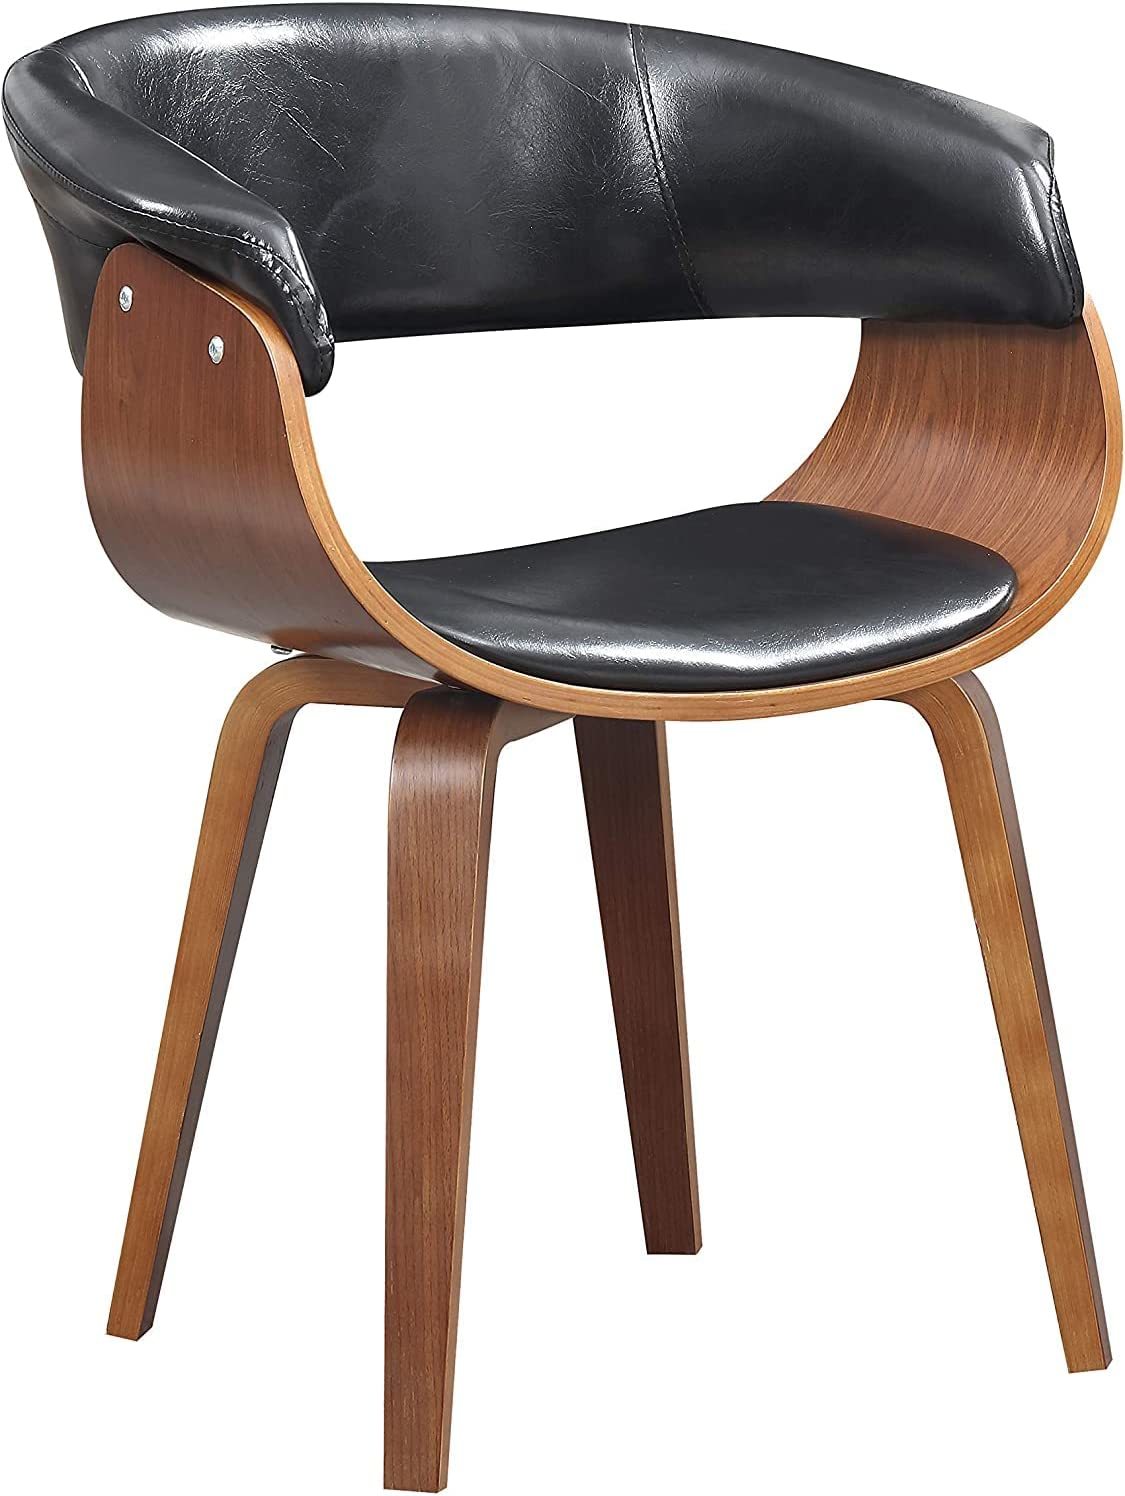 AC Pacific D-007 Mid Century Modern Curved Style Dining Chair with, Midnight - $139.99